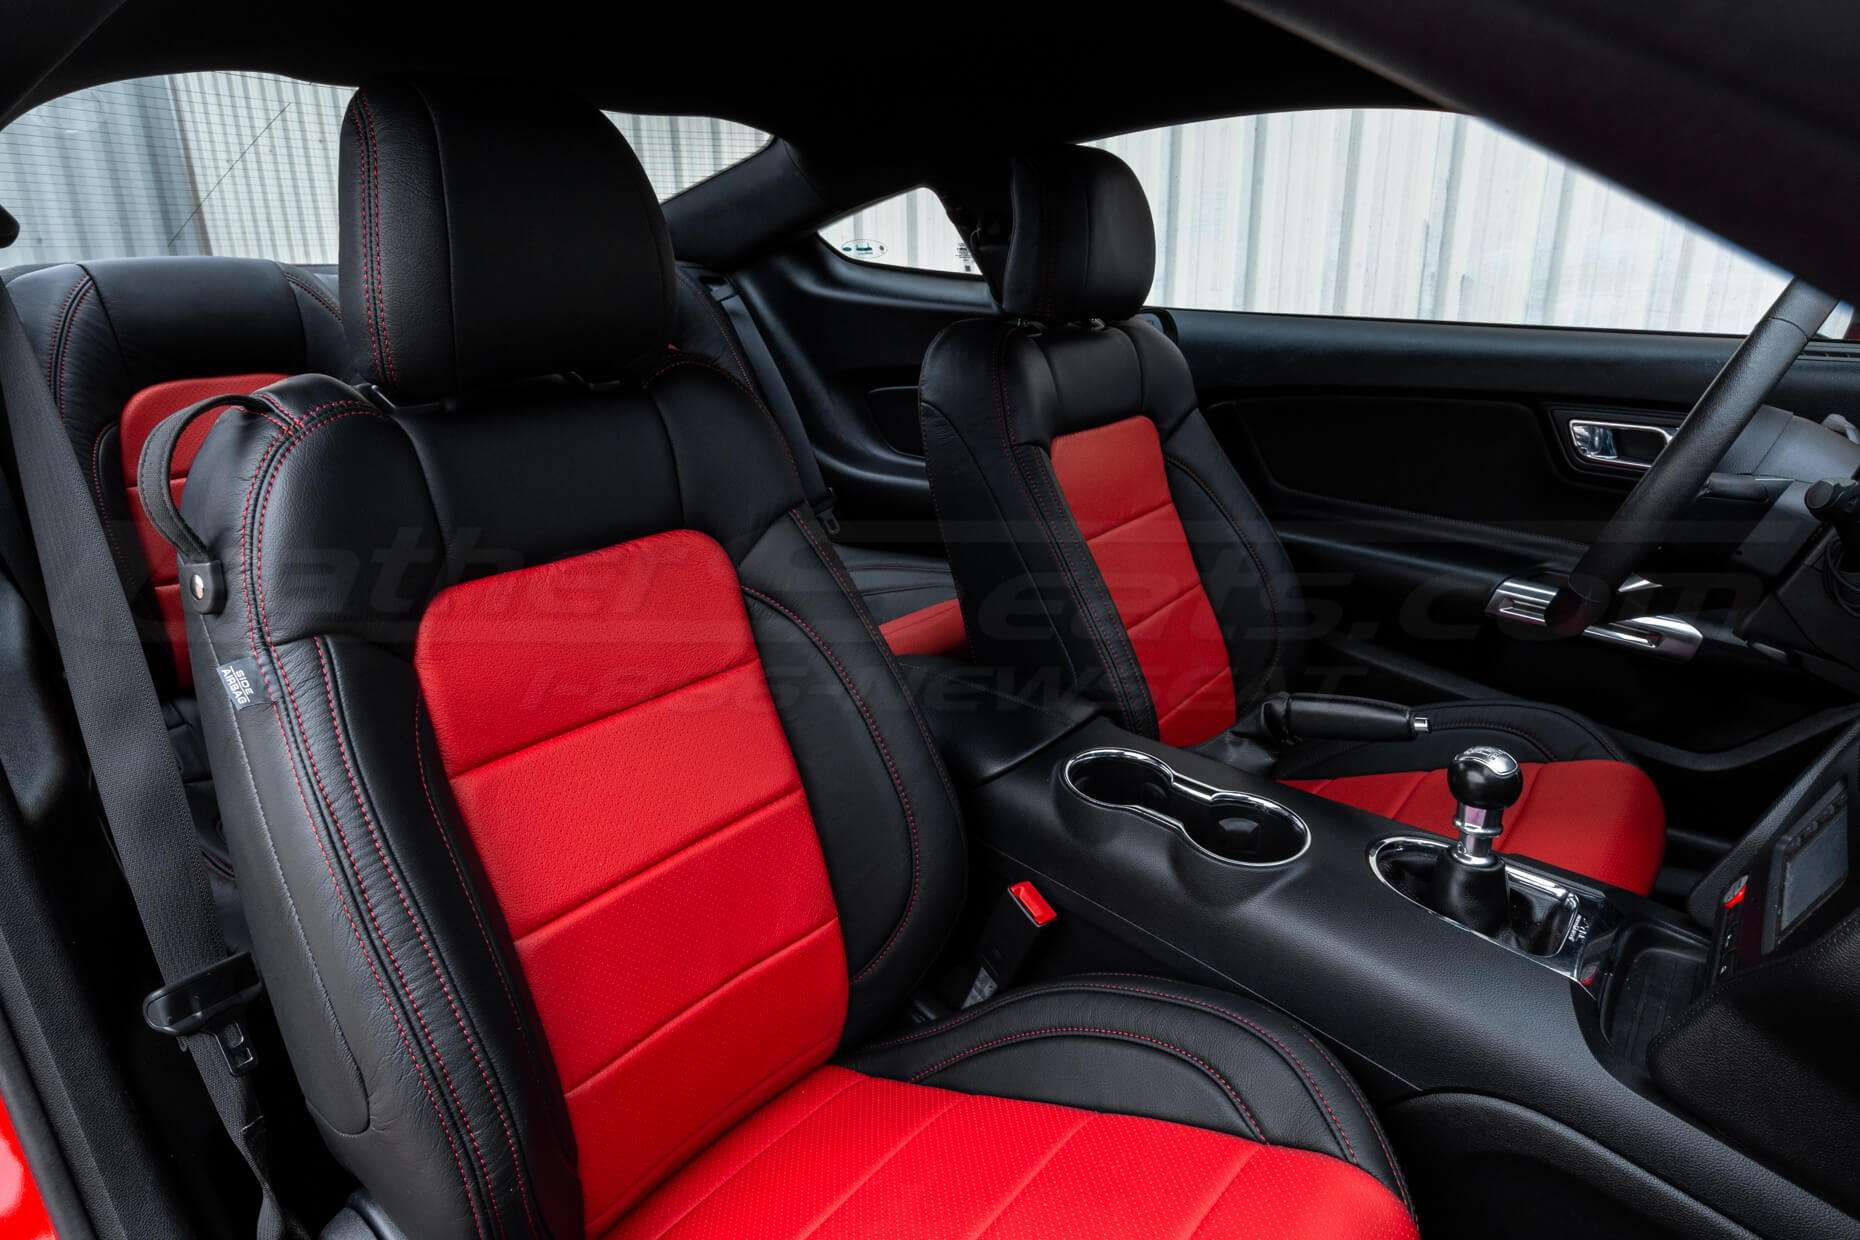 Ford Mustang installed leather kit - Black & Bright Red - Front interior from passenger side